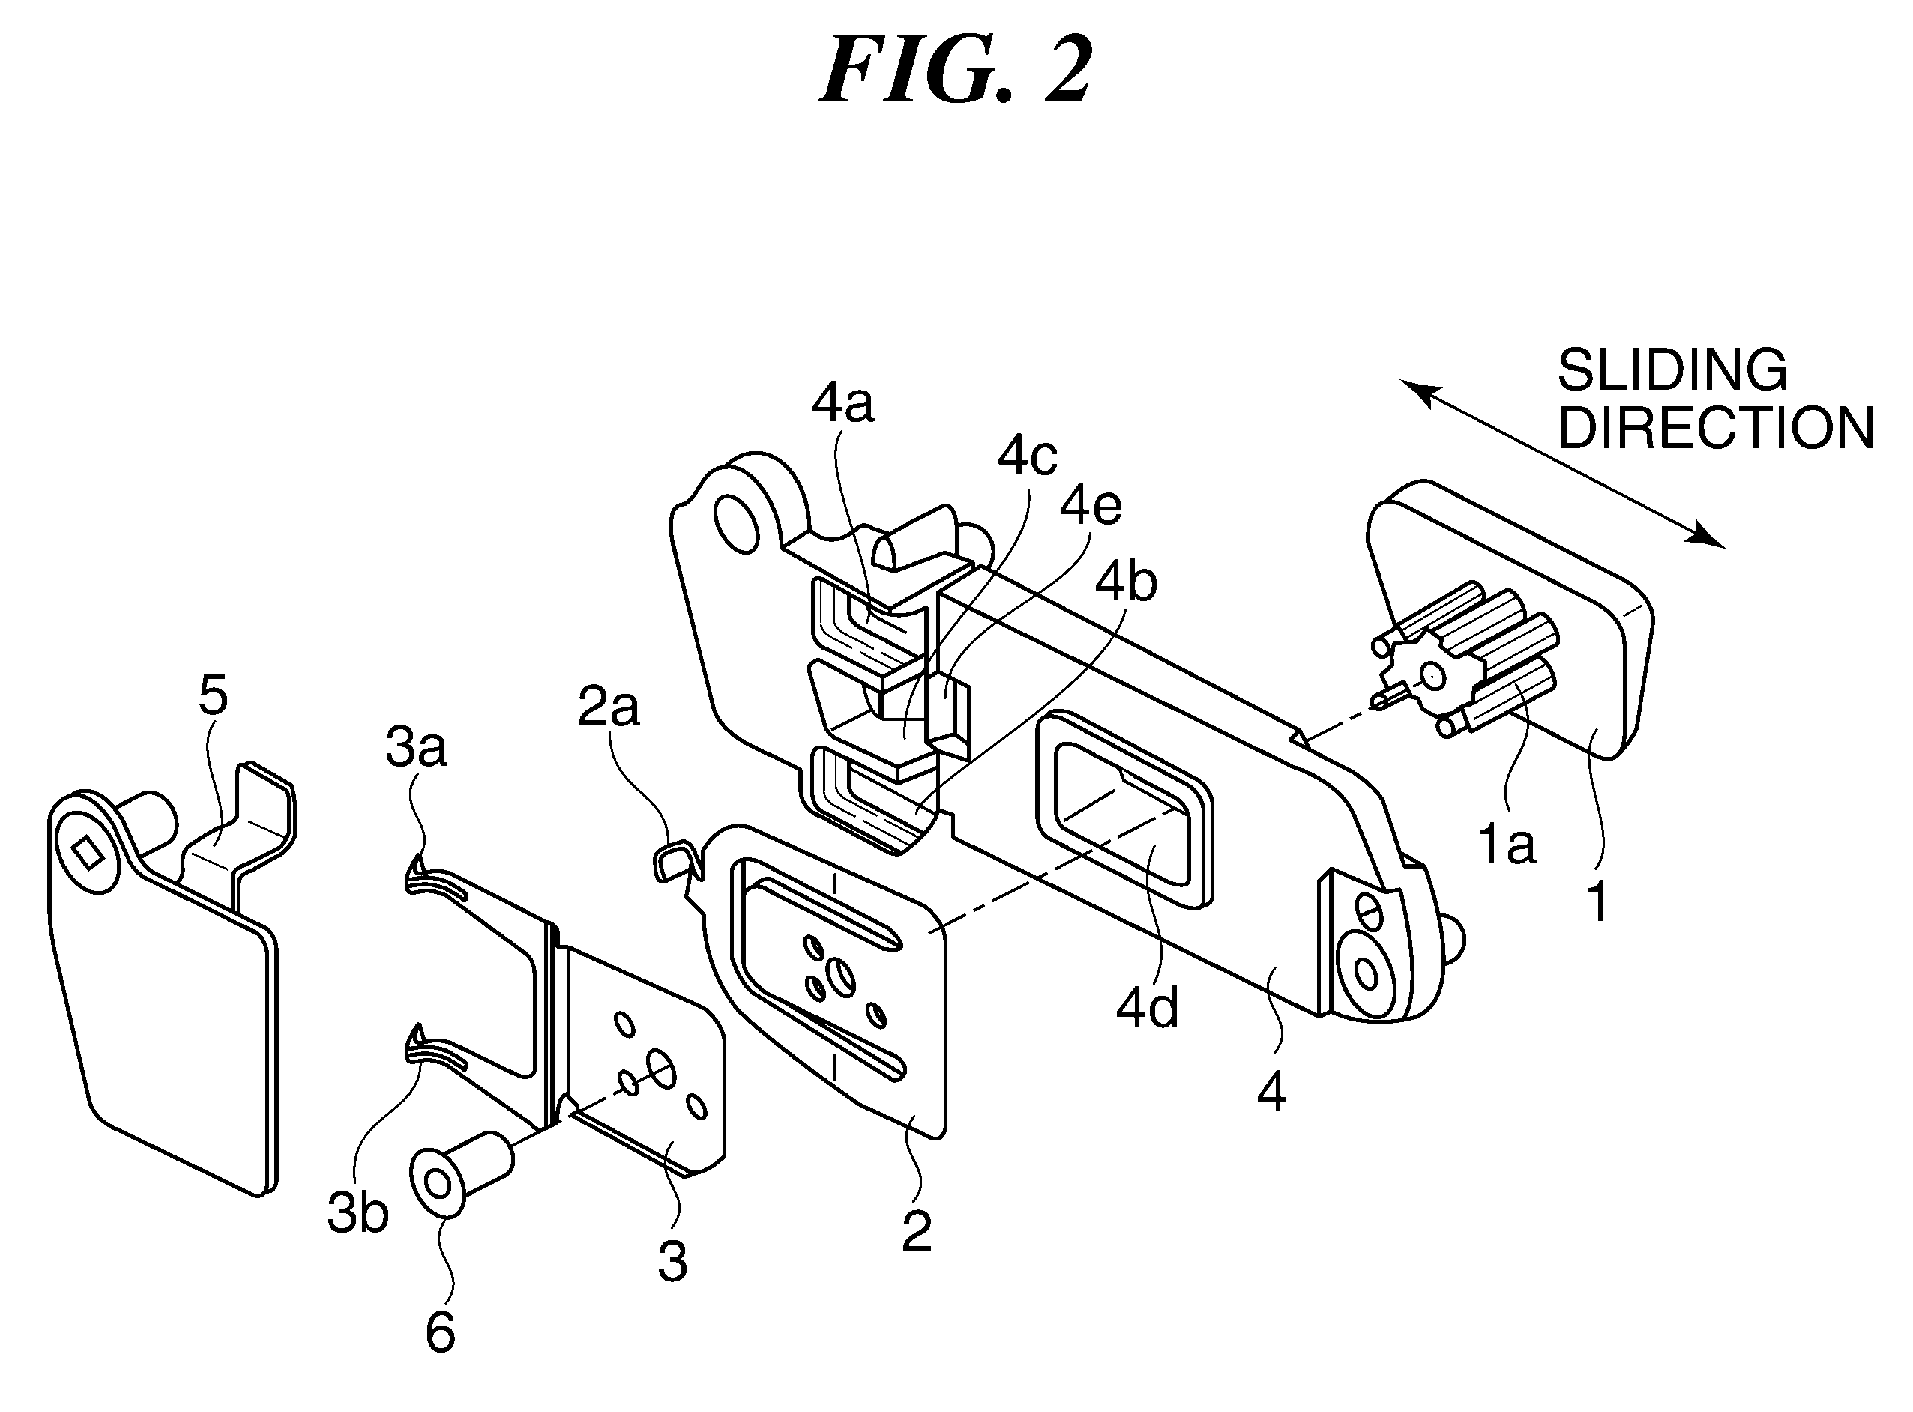 Slide switch for use in electronic apparatus, and electronic apparatus